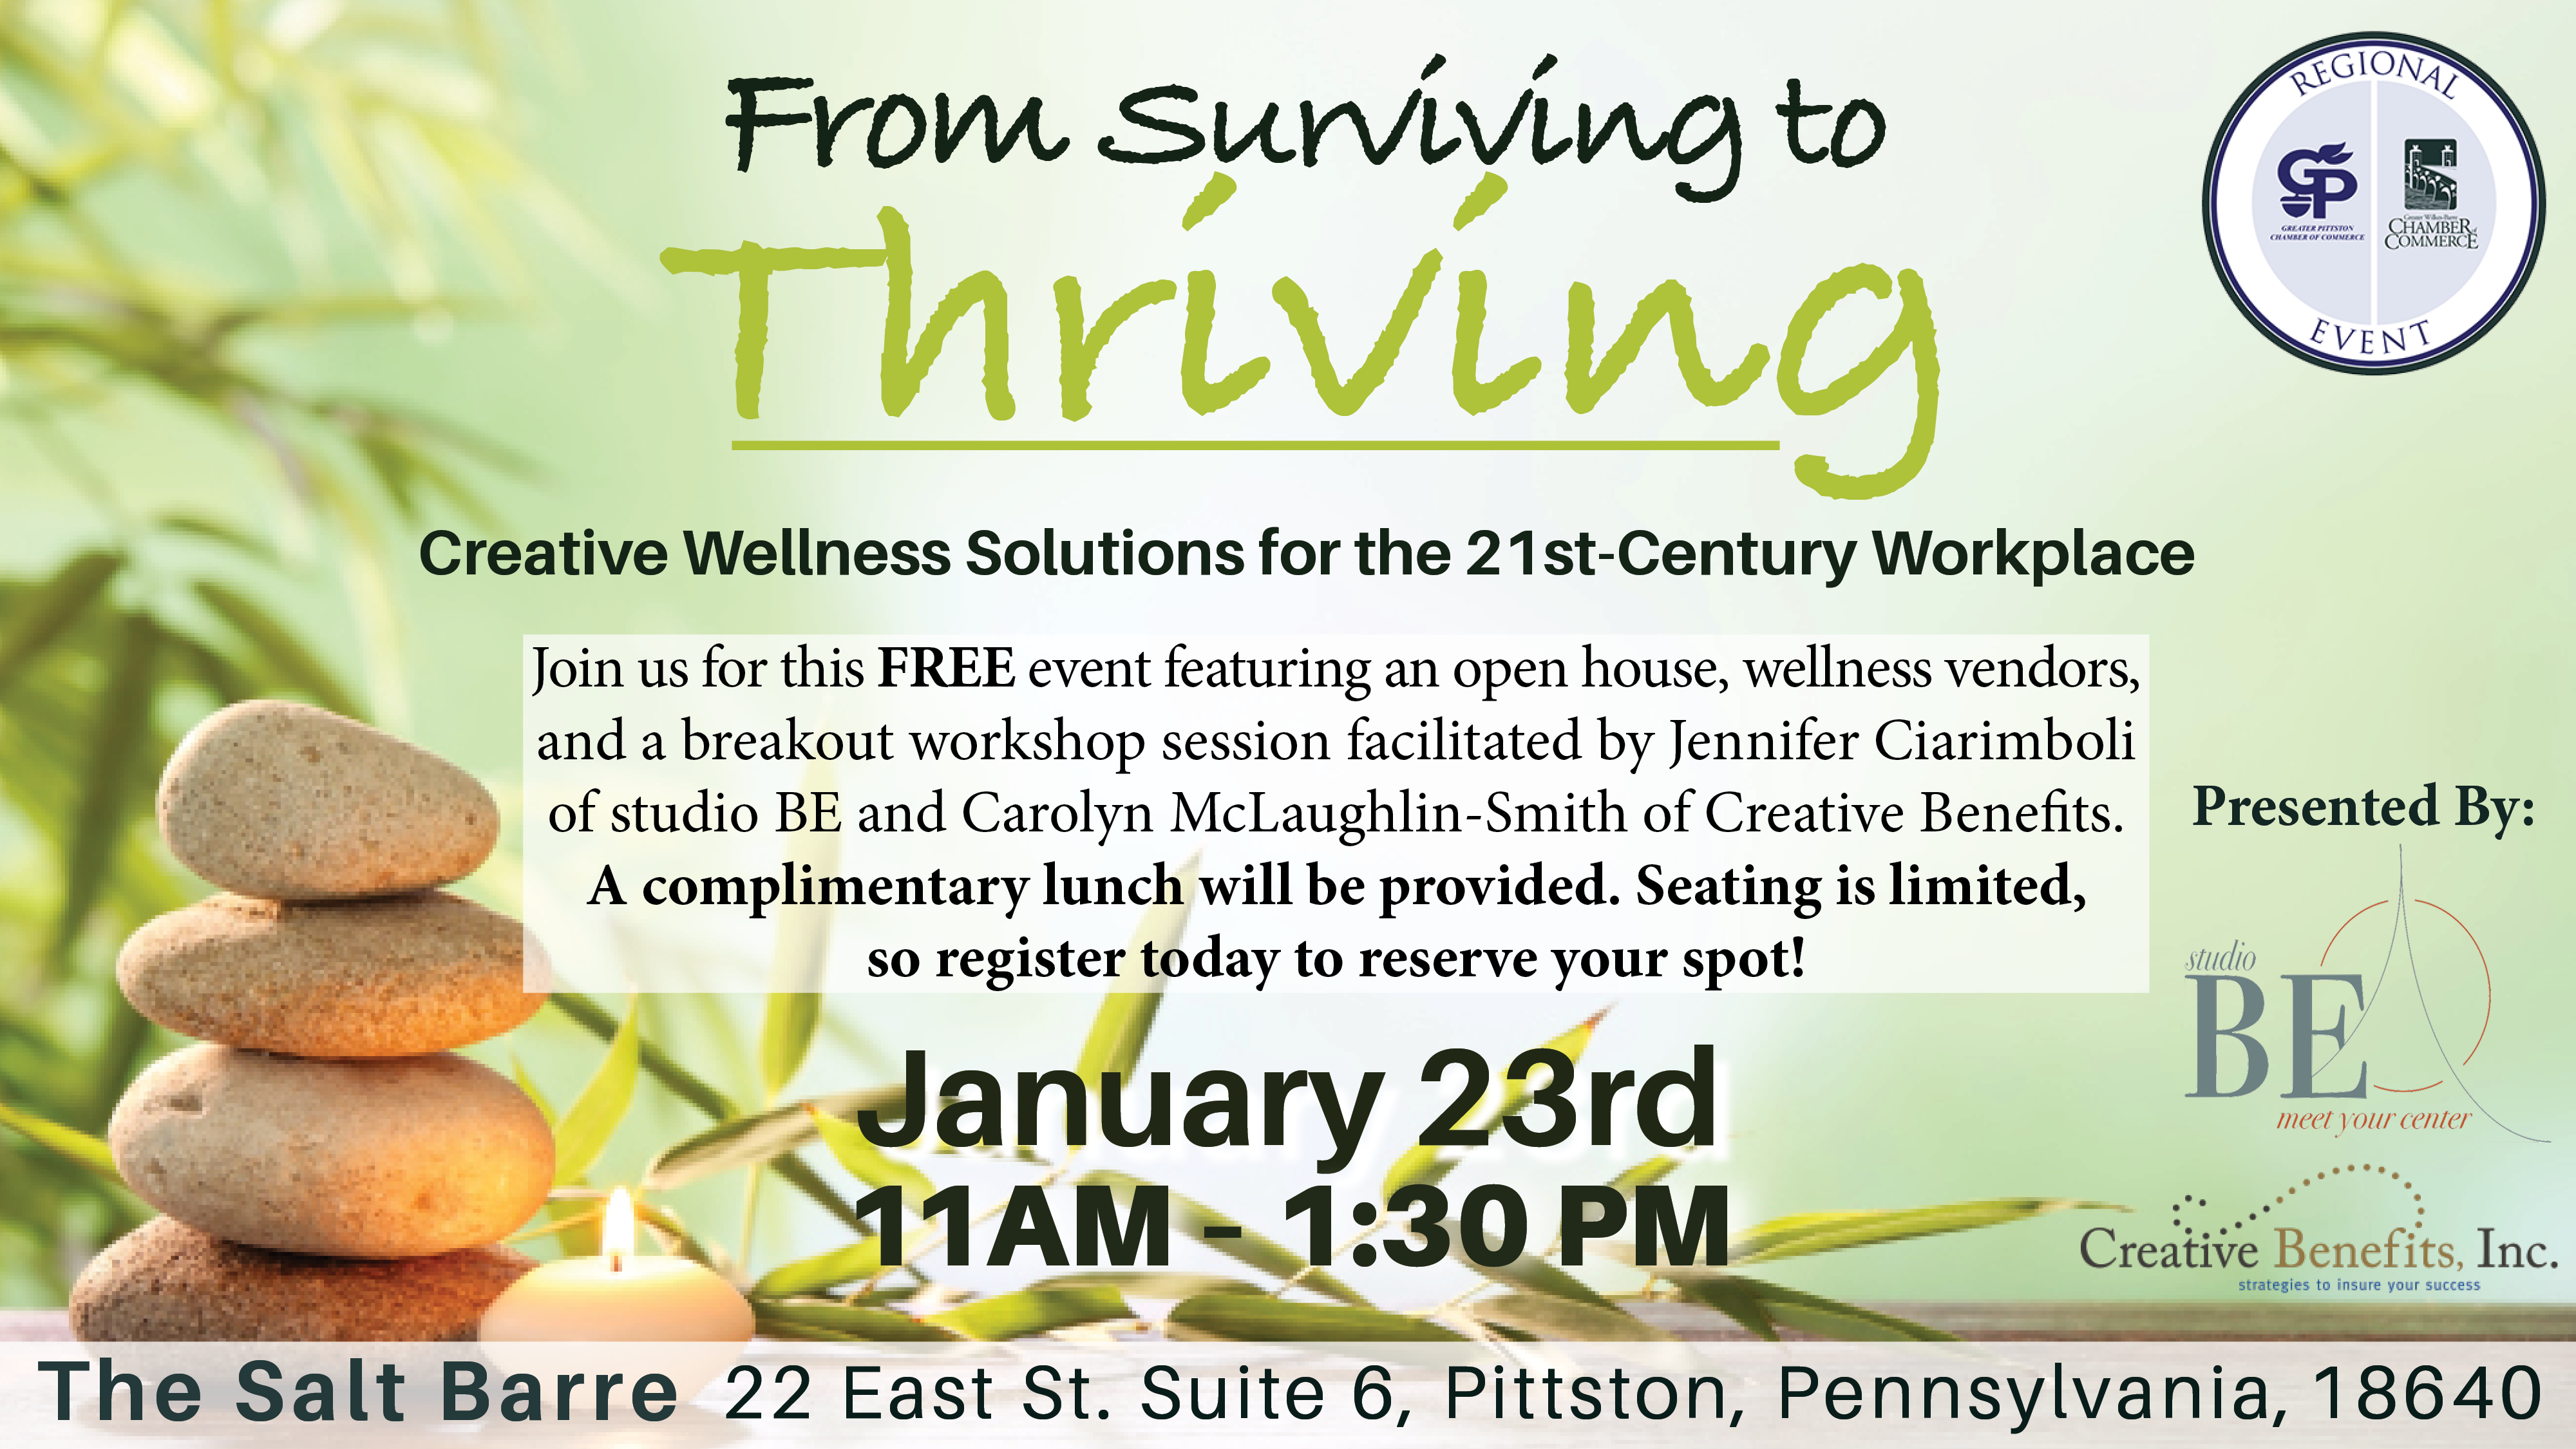 Image for Upcoming Event: From Surviving to Thriving